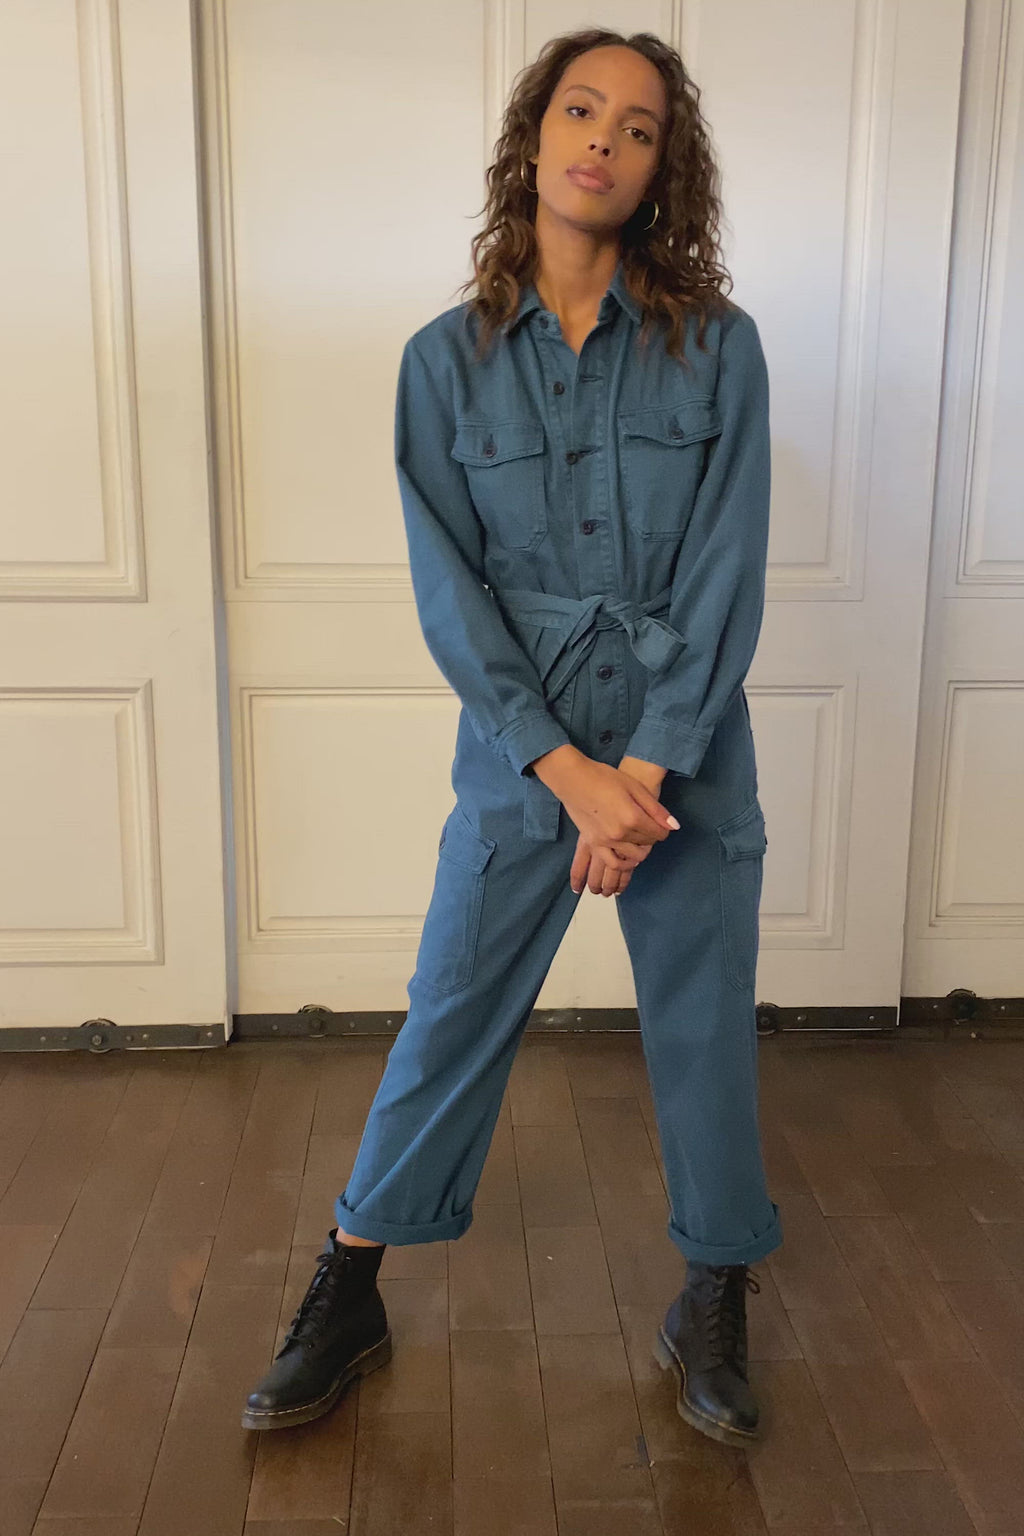 Troy - Blue Velvet is a 100% cotton coverall made sustainably by Boyish Jeans.